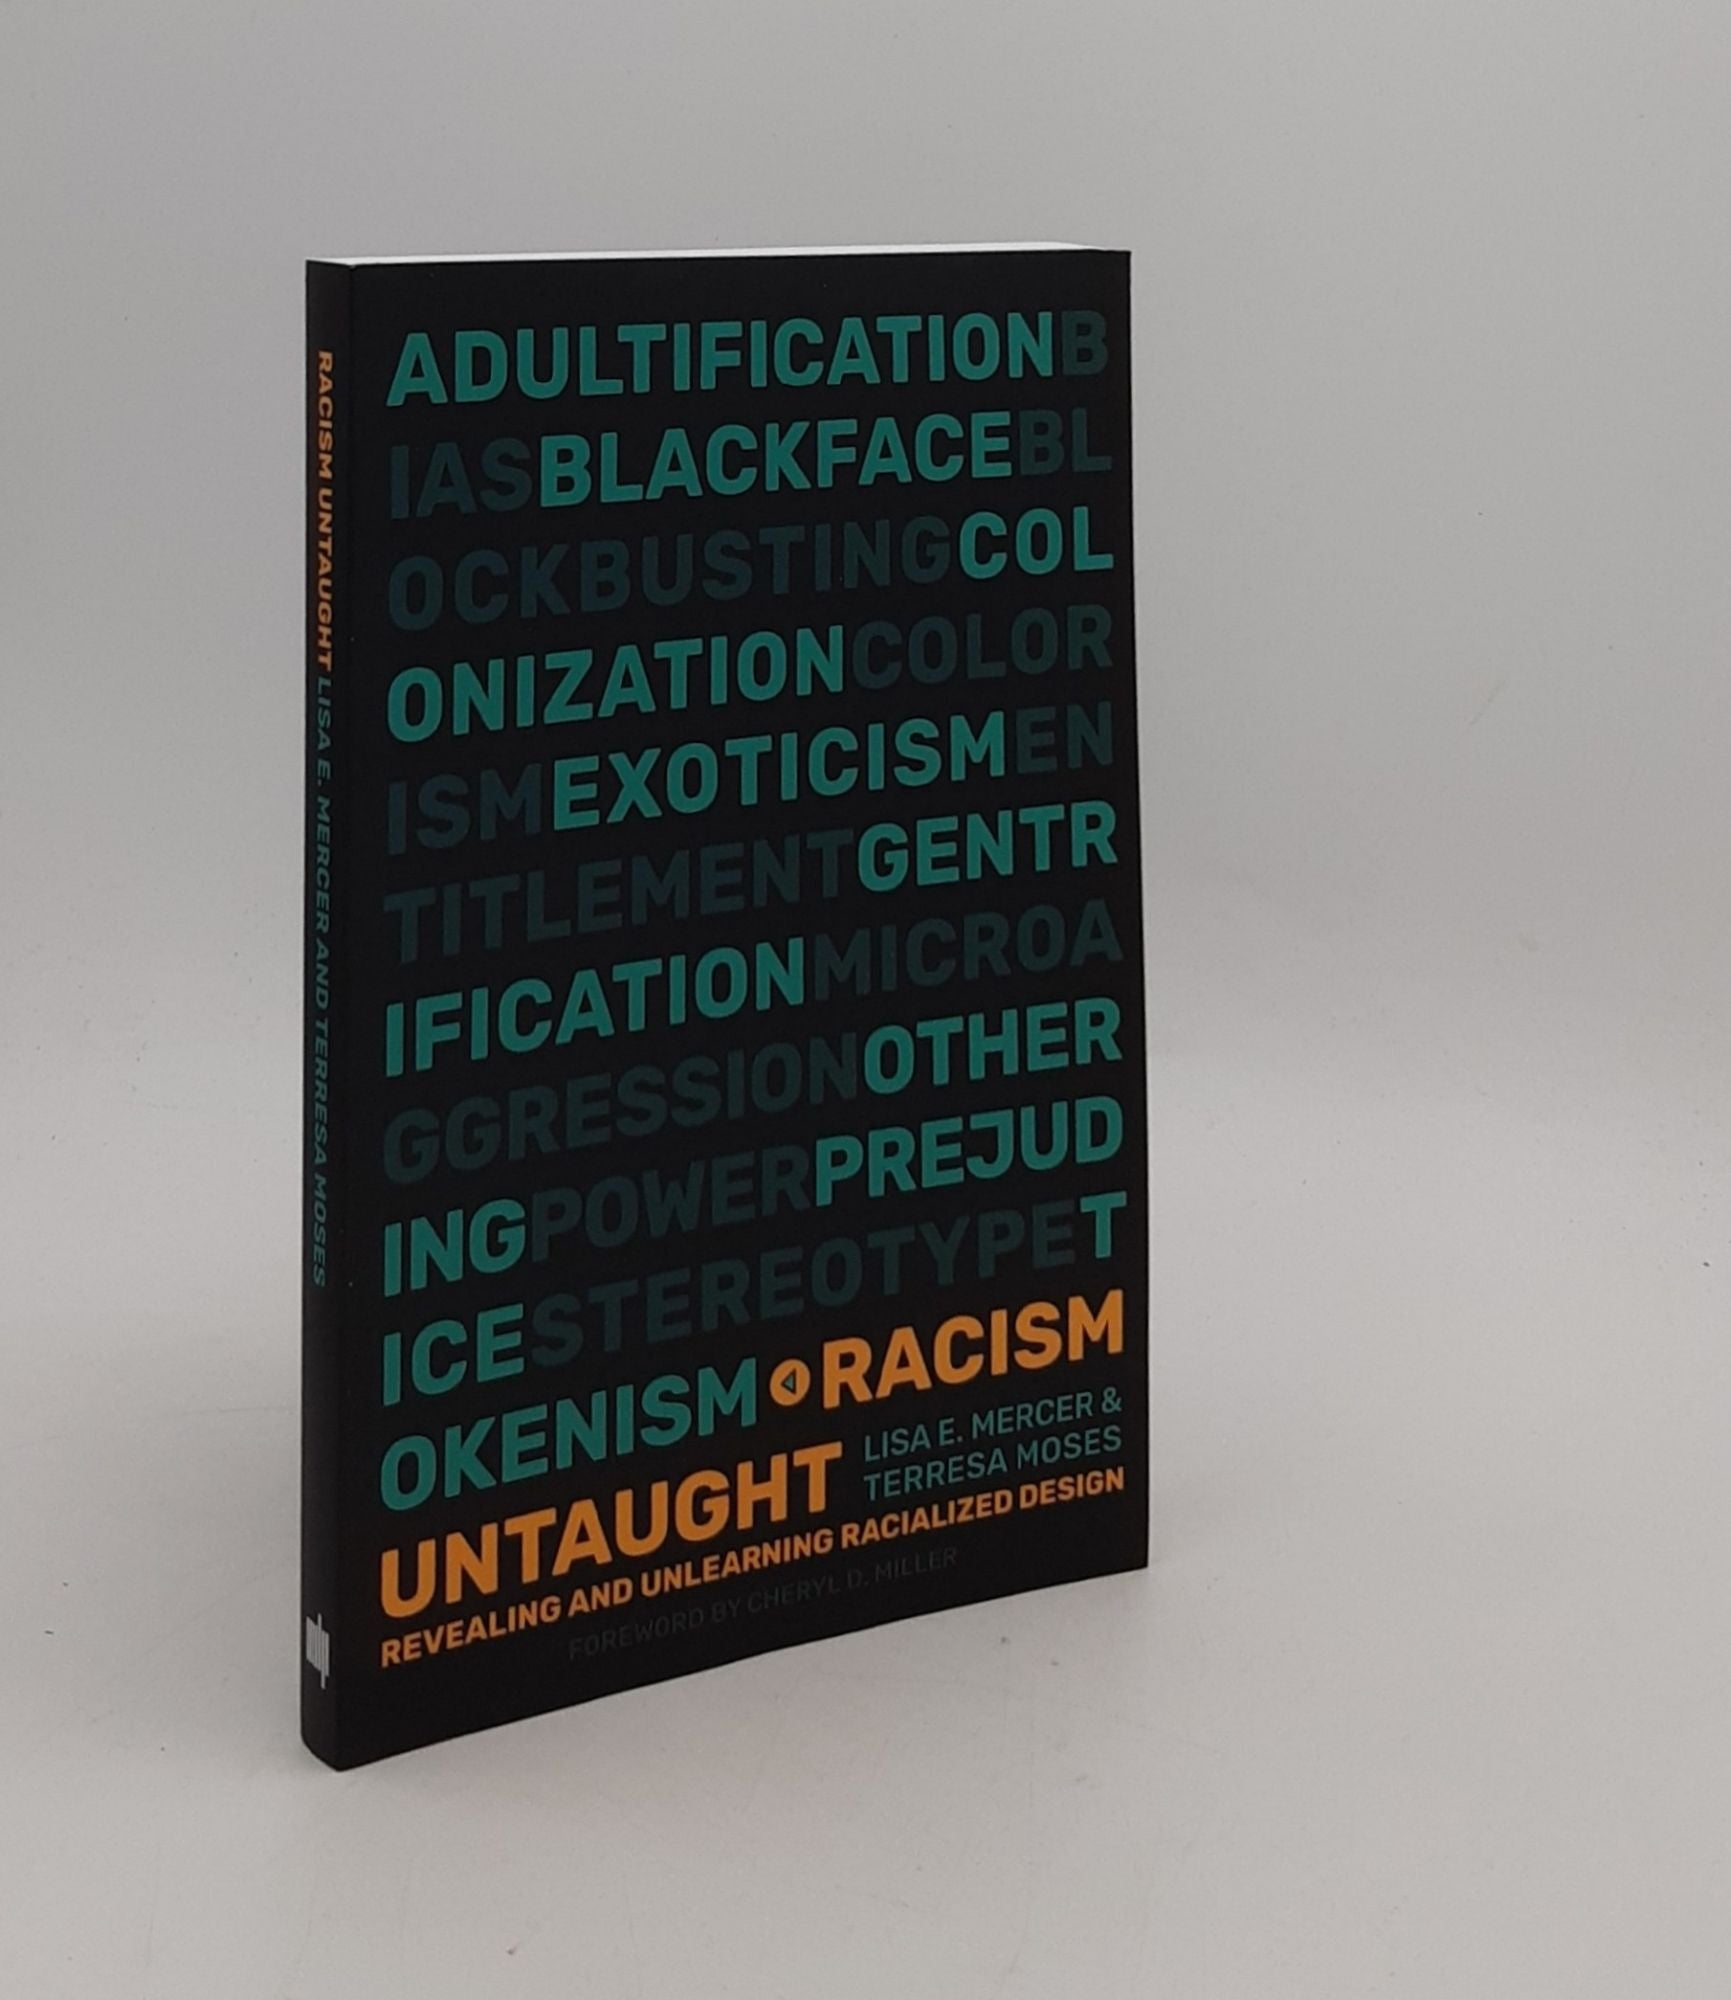 MERCER Lisa E. MOSES Terresa - Racism Untaught Revealing and Unlearning Racialized Design